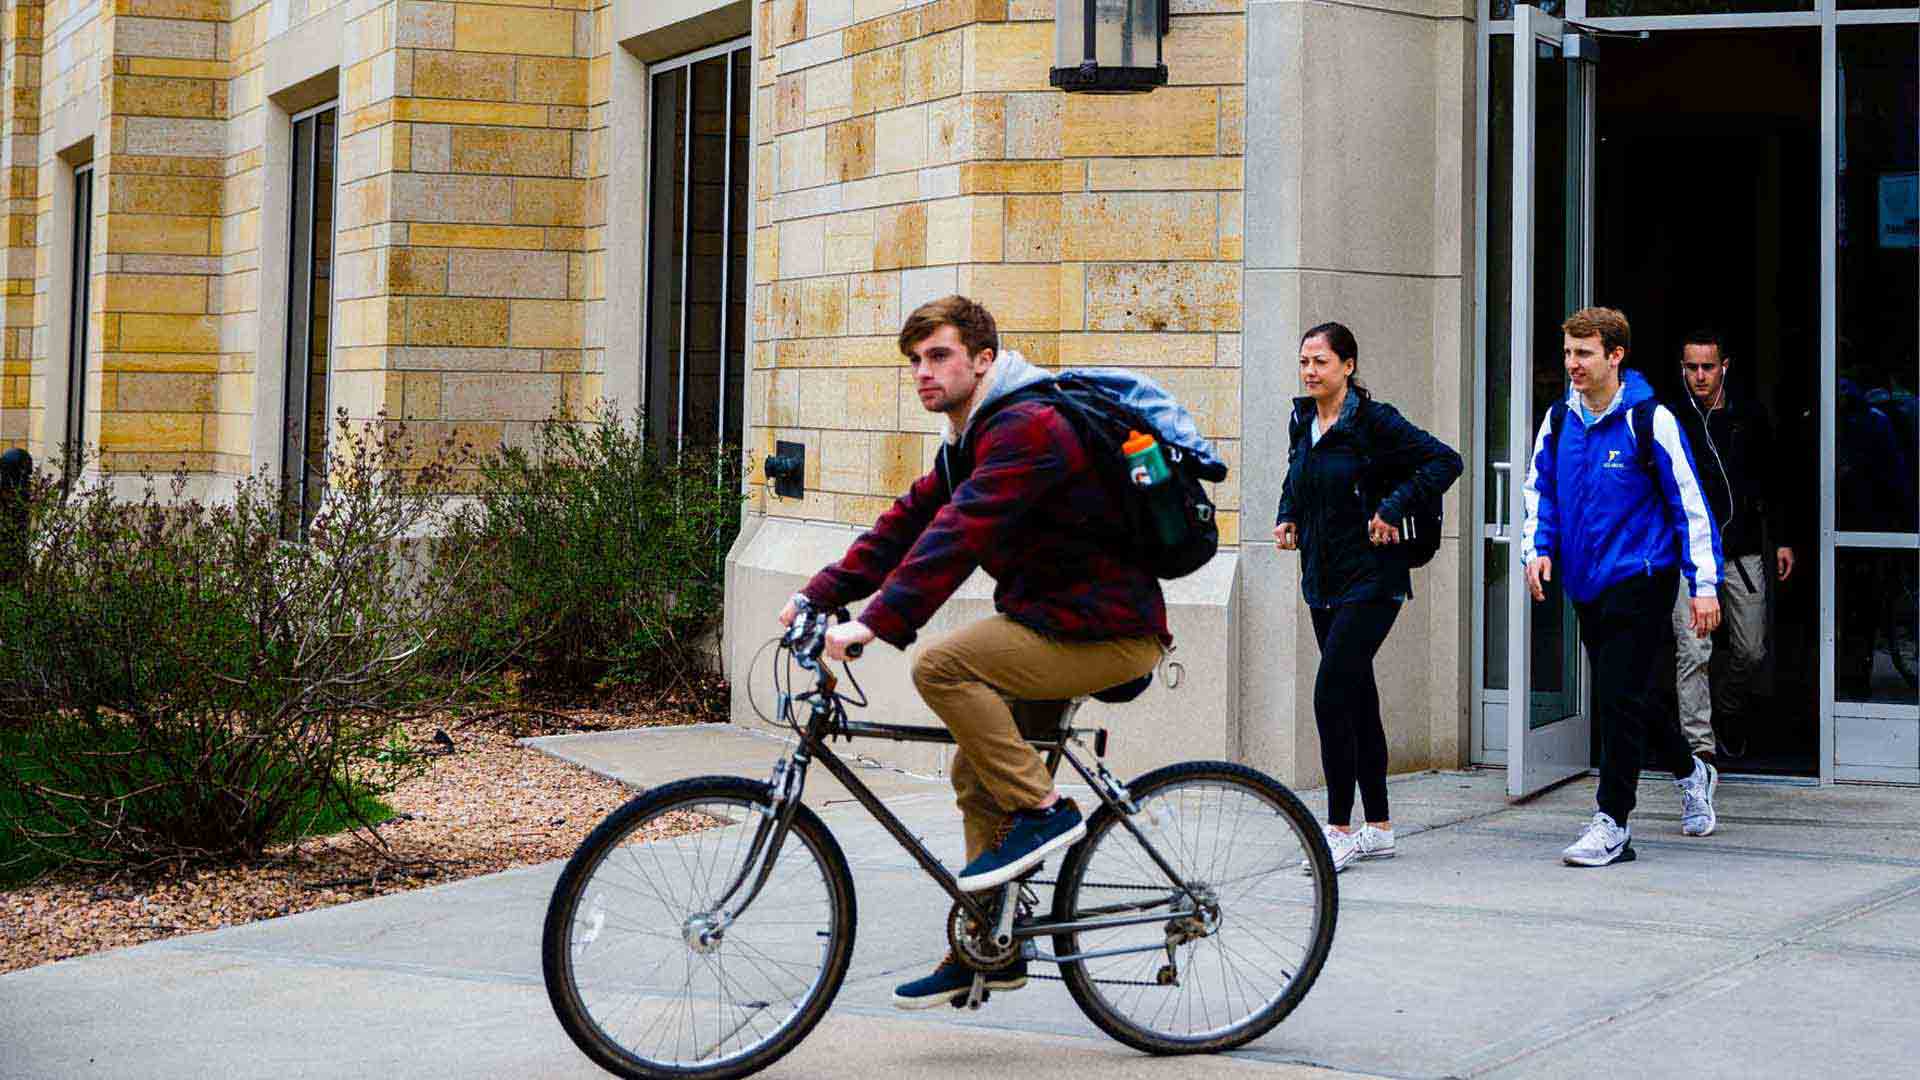 Several students exit McNeely hall by foot and on bicycle.